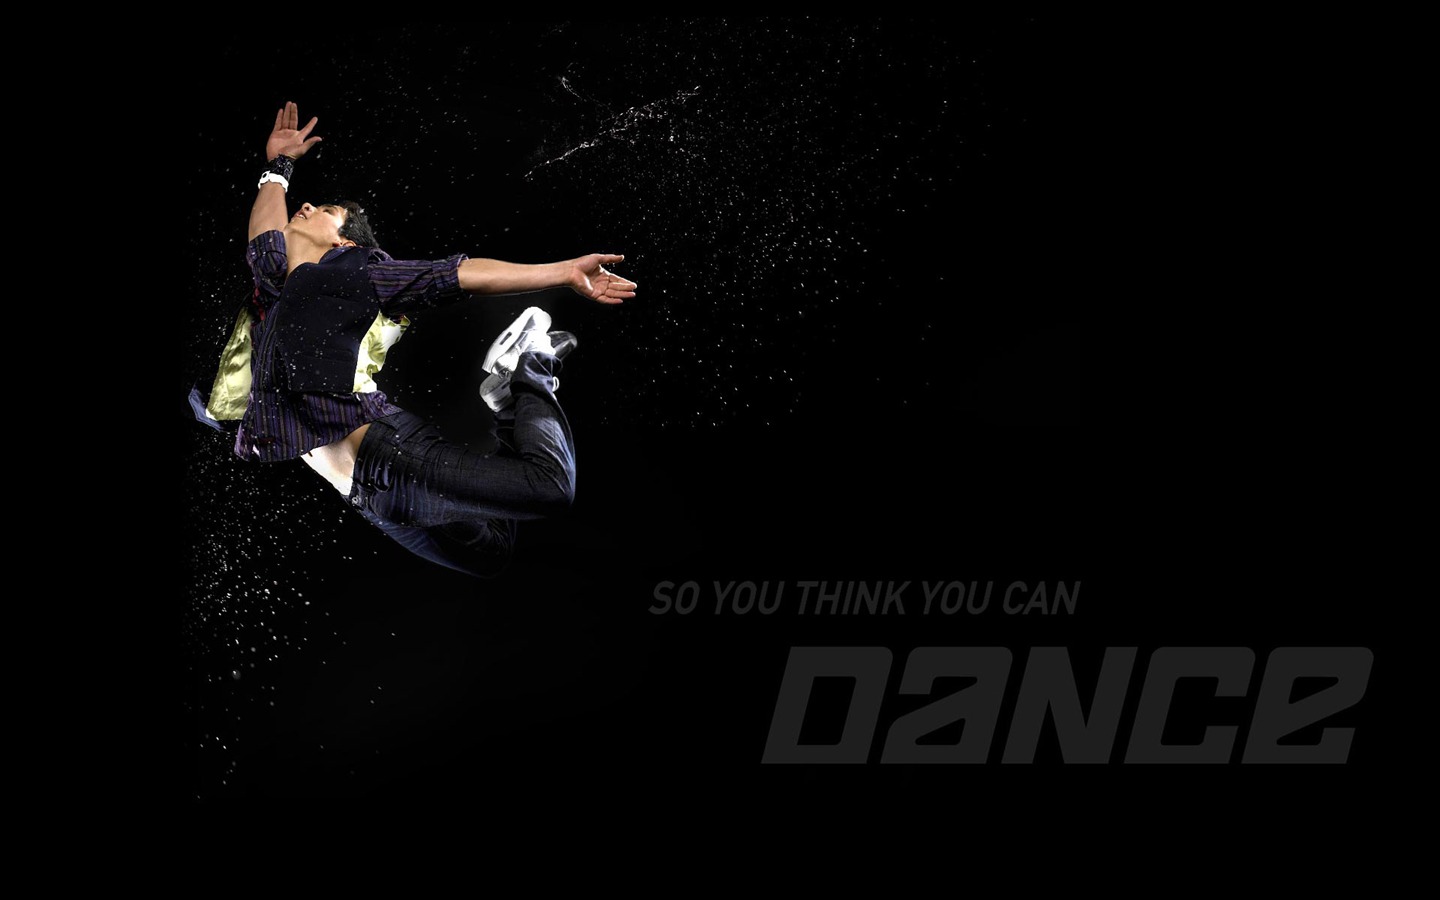 So You Think You Can Dance wallpaper (1) #8 - 1440x900